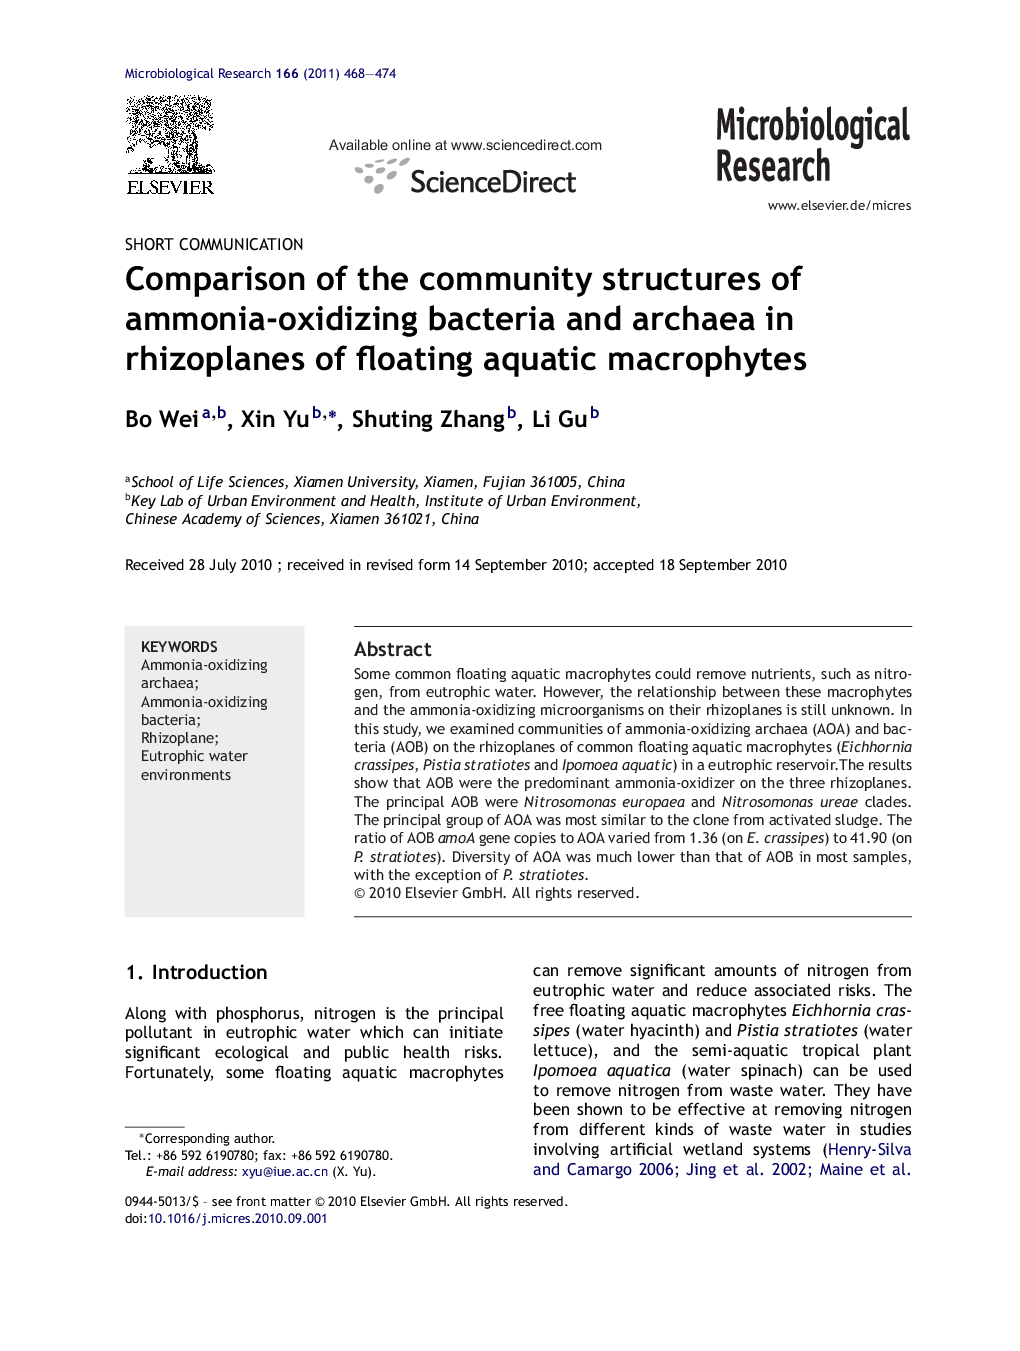 Comparison of the community structures of ammonia-oxidizing bacteria and archaea in rhizoplanes of floating aquatic macrophytes